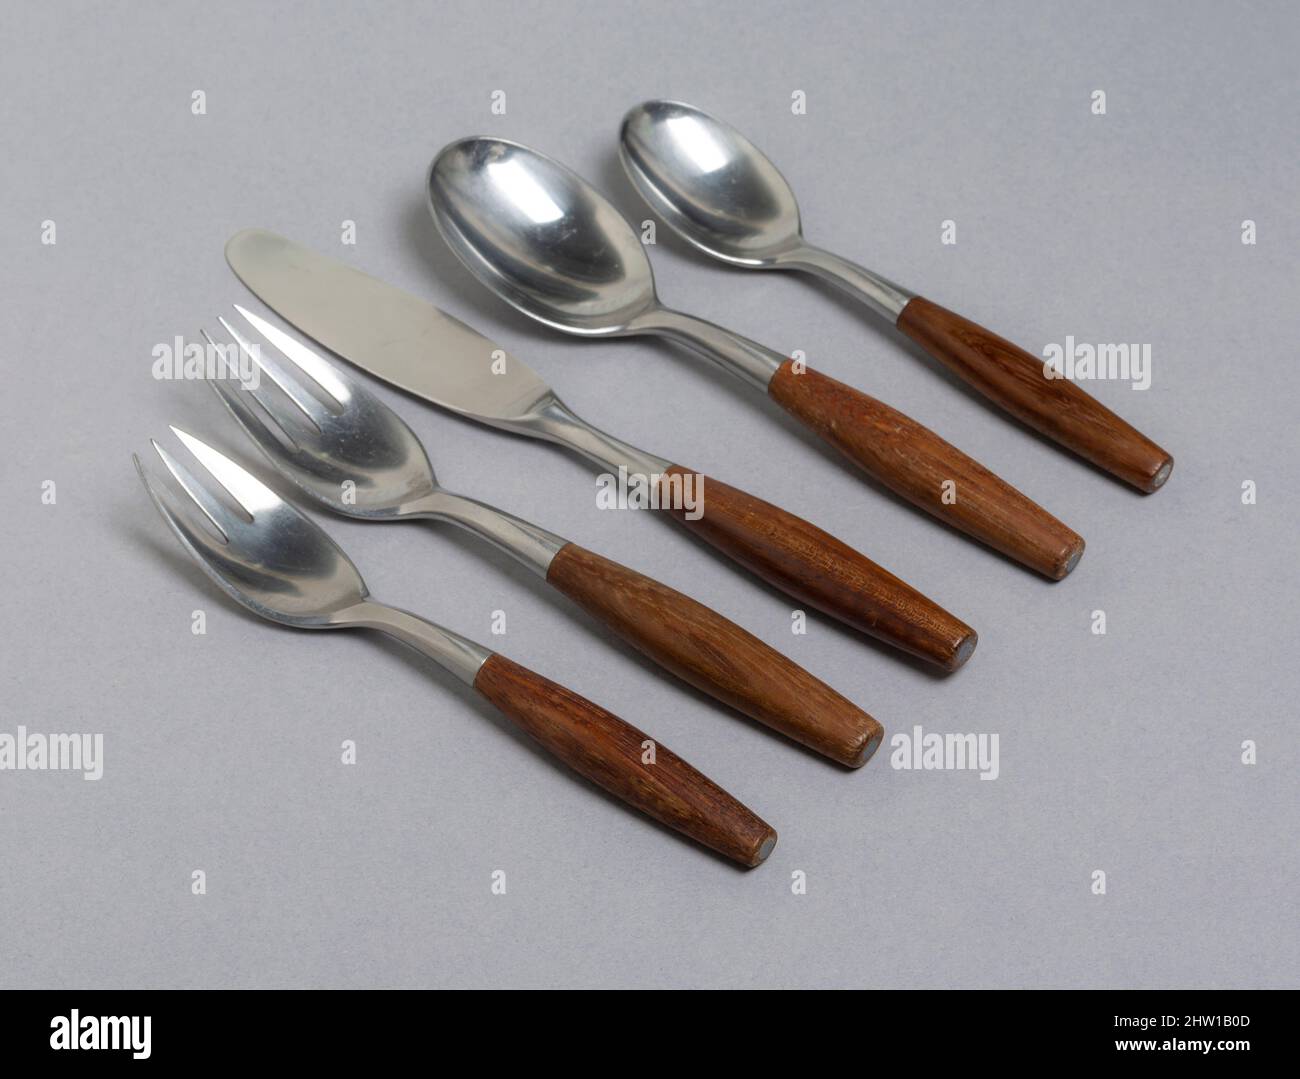 Dansk Fjord place setting with teak handles, 1954 design by Jens Quistgaard, made in Germany Stock Photo